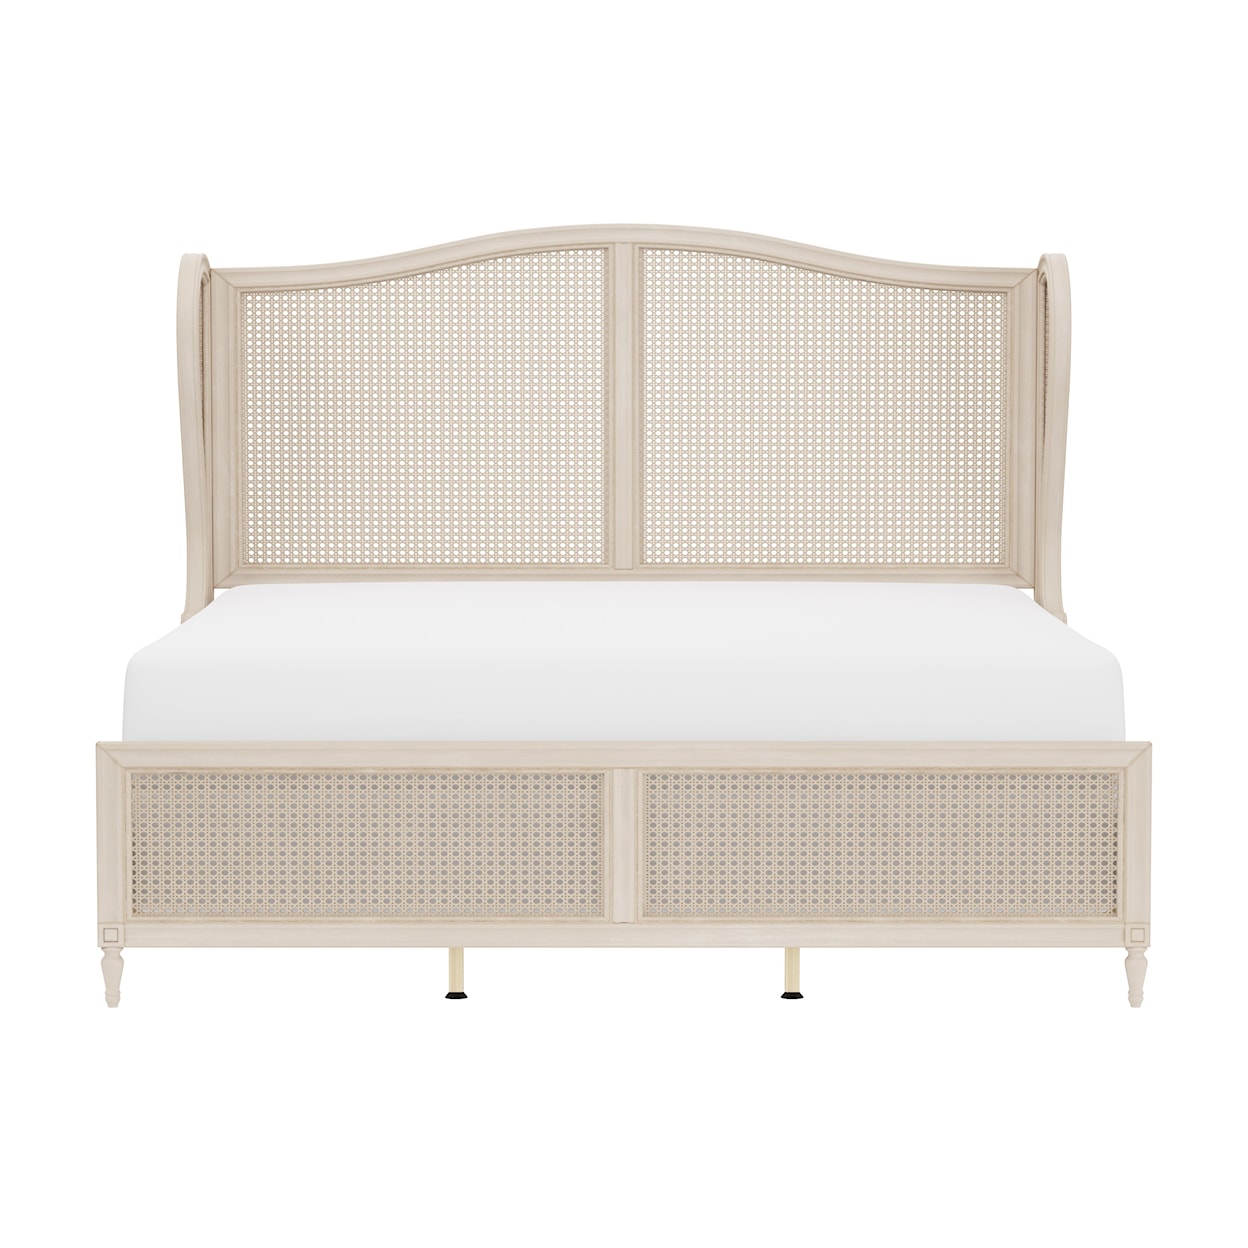 Hillsdale Sausalito King Bed